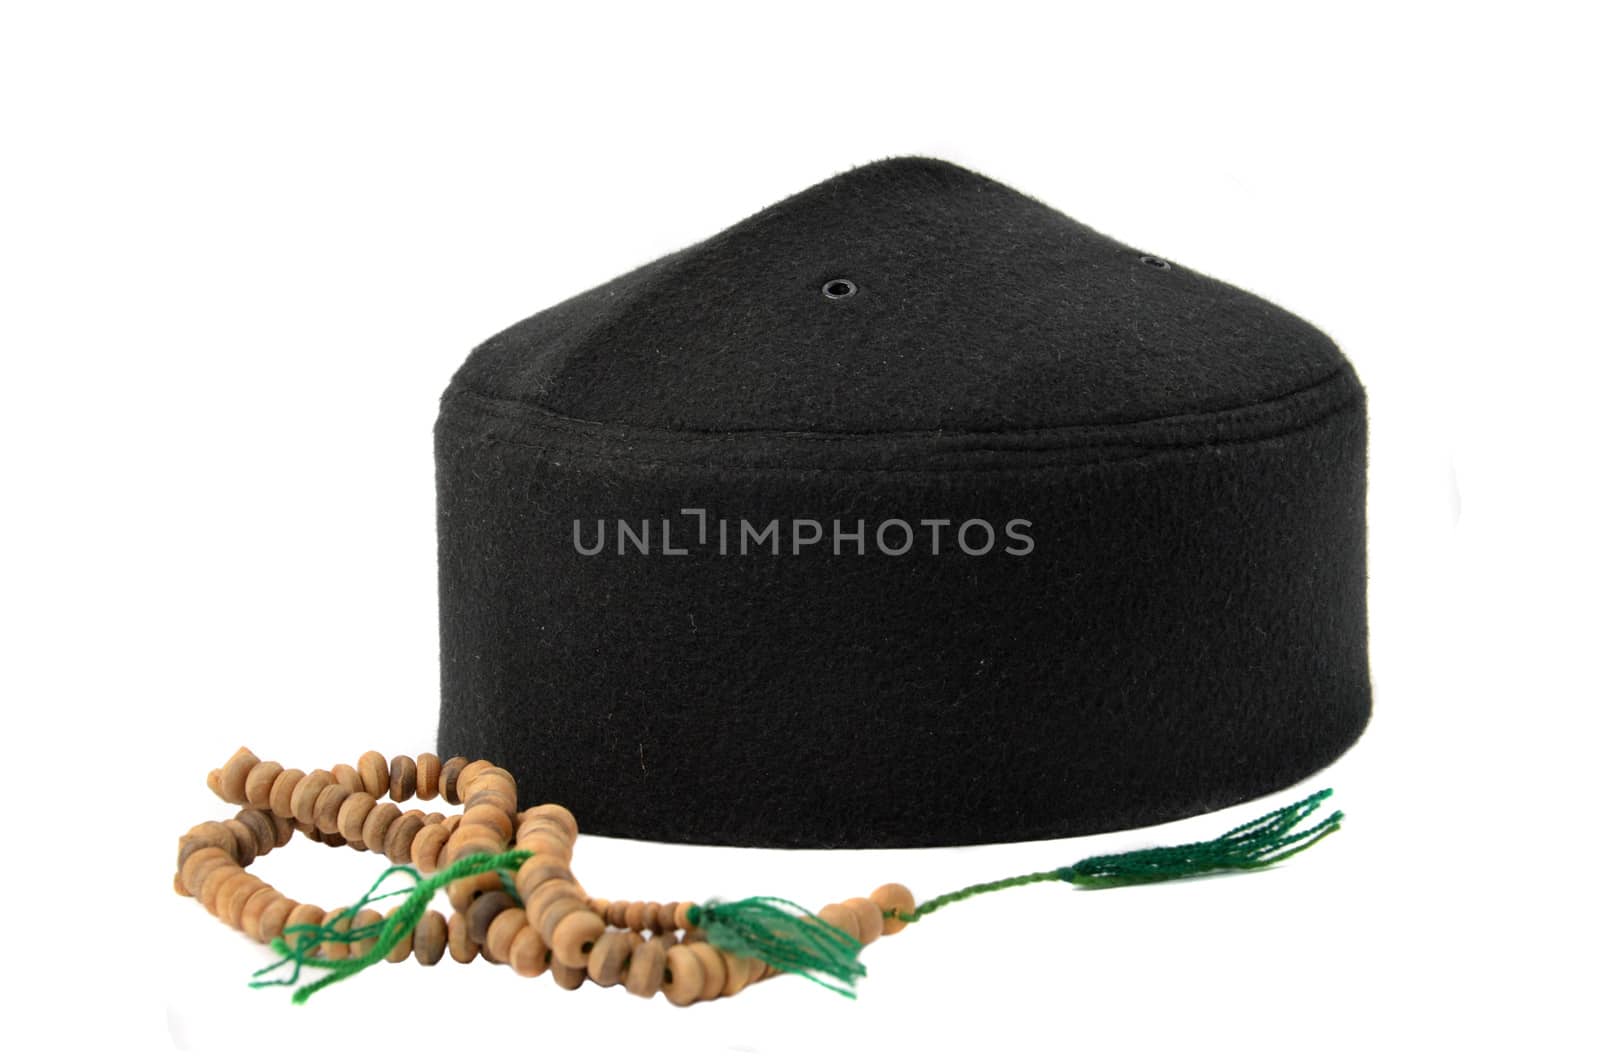 songkok, a traditional hat for male Muslim on white background